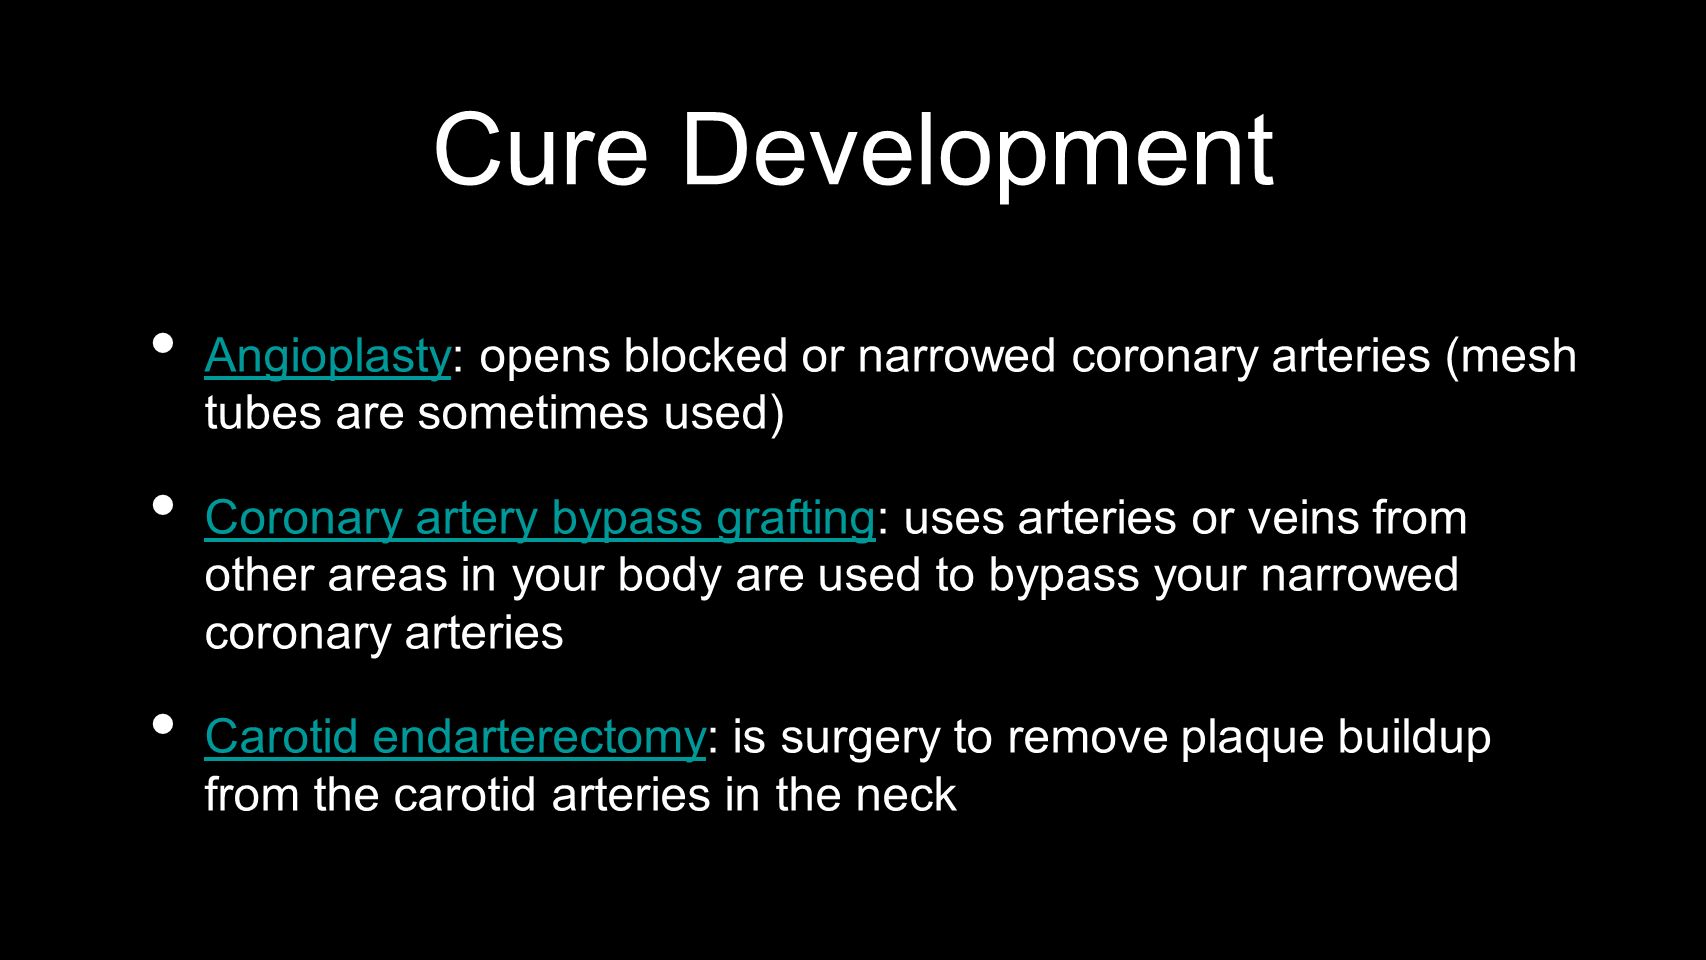 Cure Development Angioplasty: opens blocked or narrowed coronary arteries (mesh tubes are sometimes used)